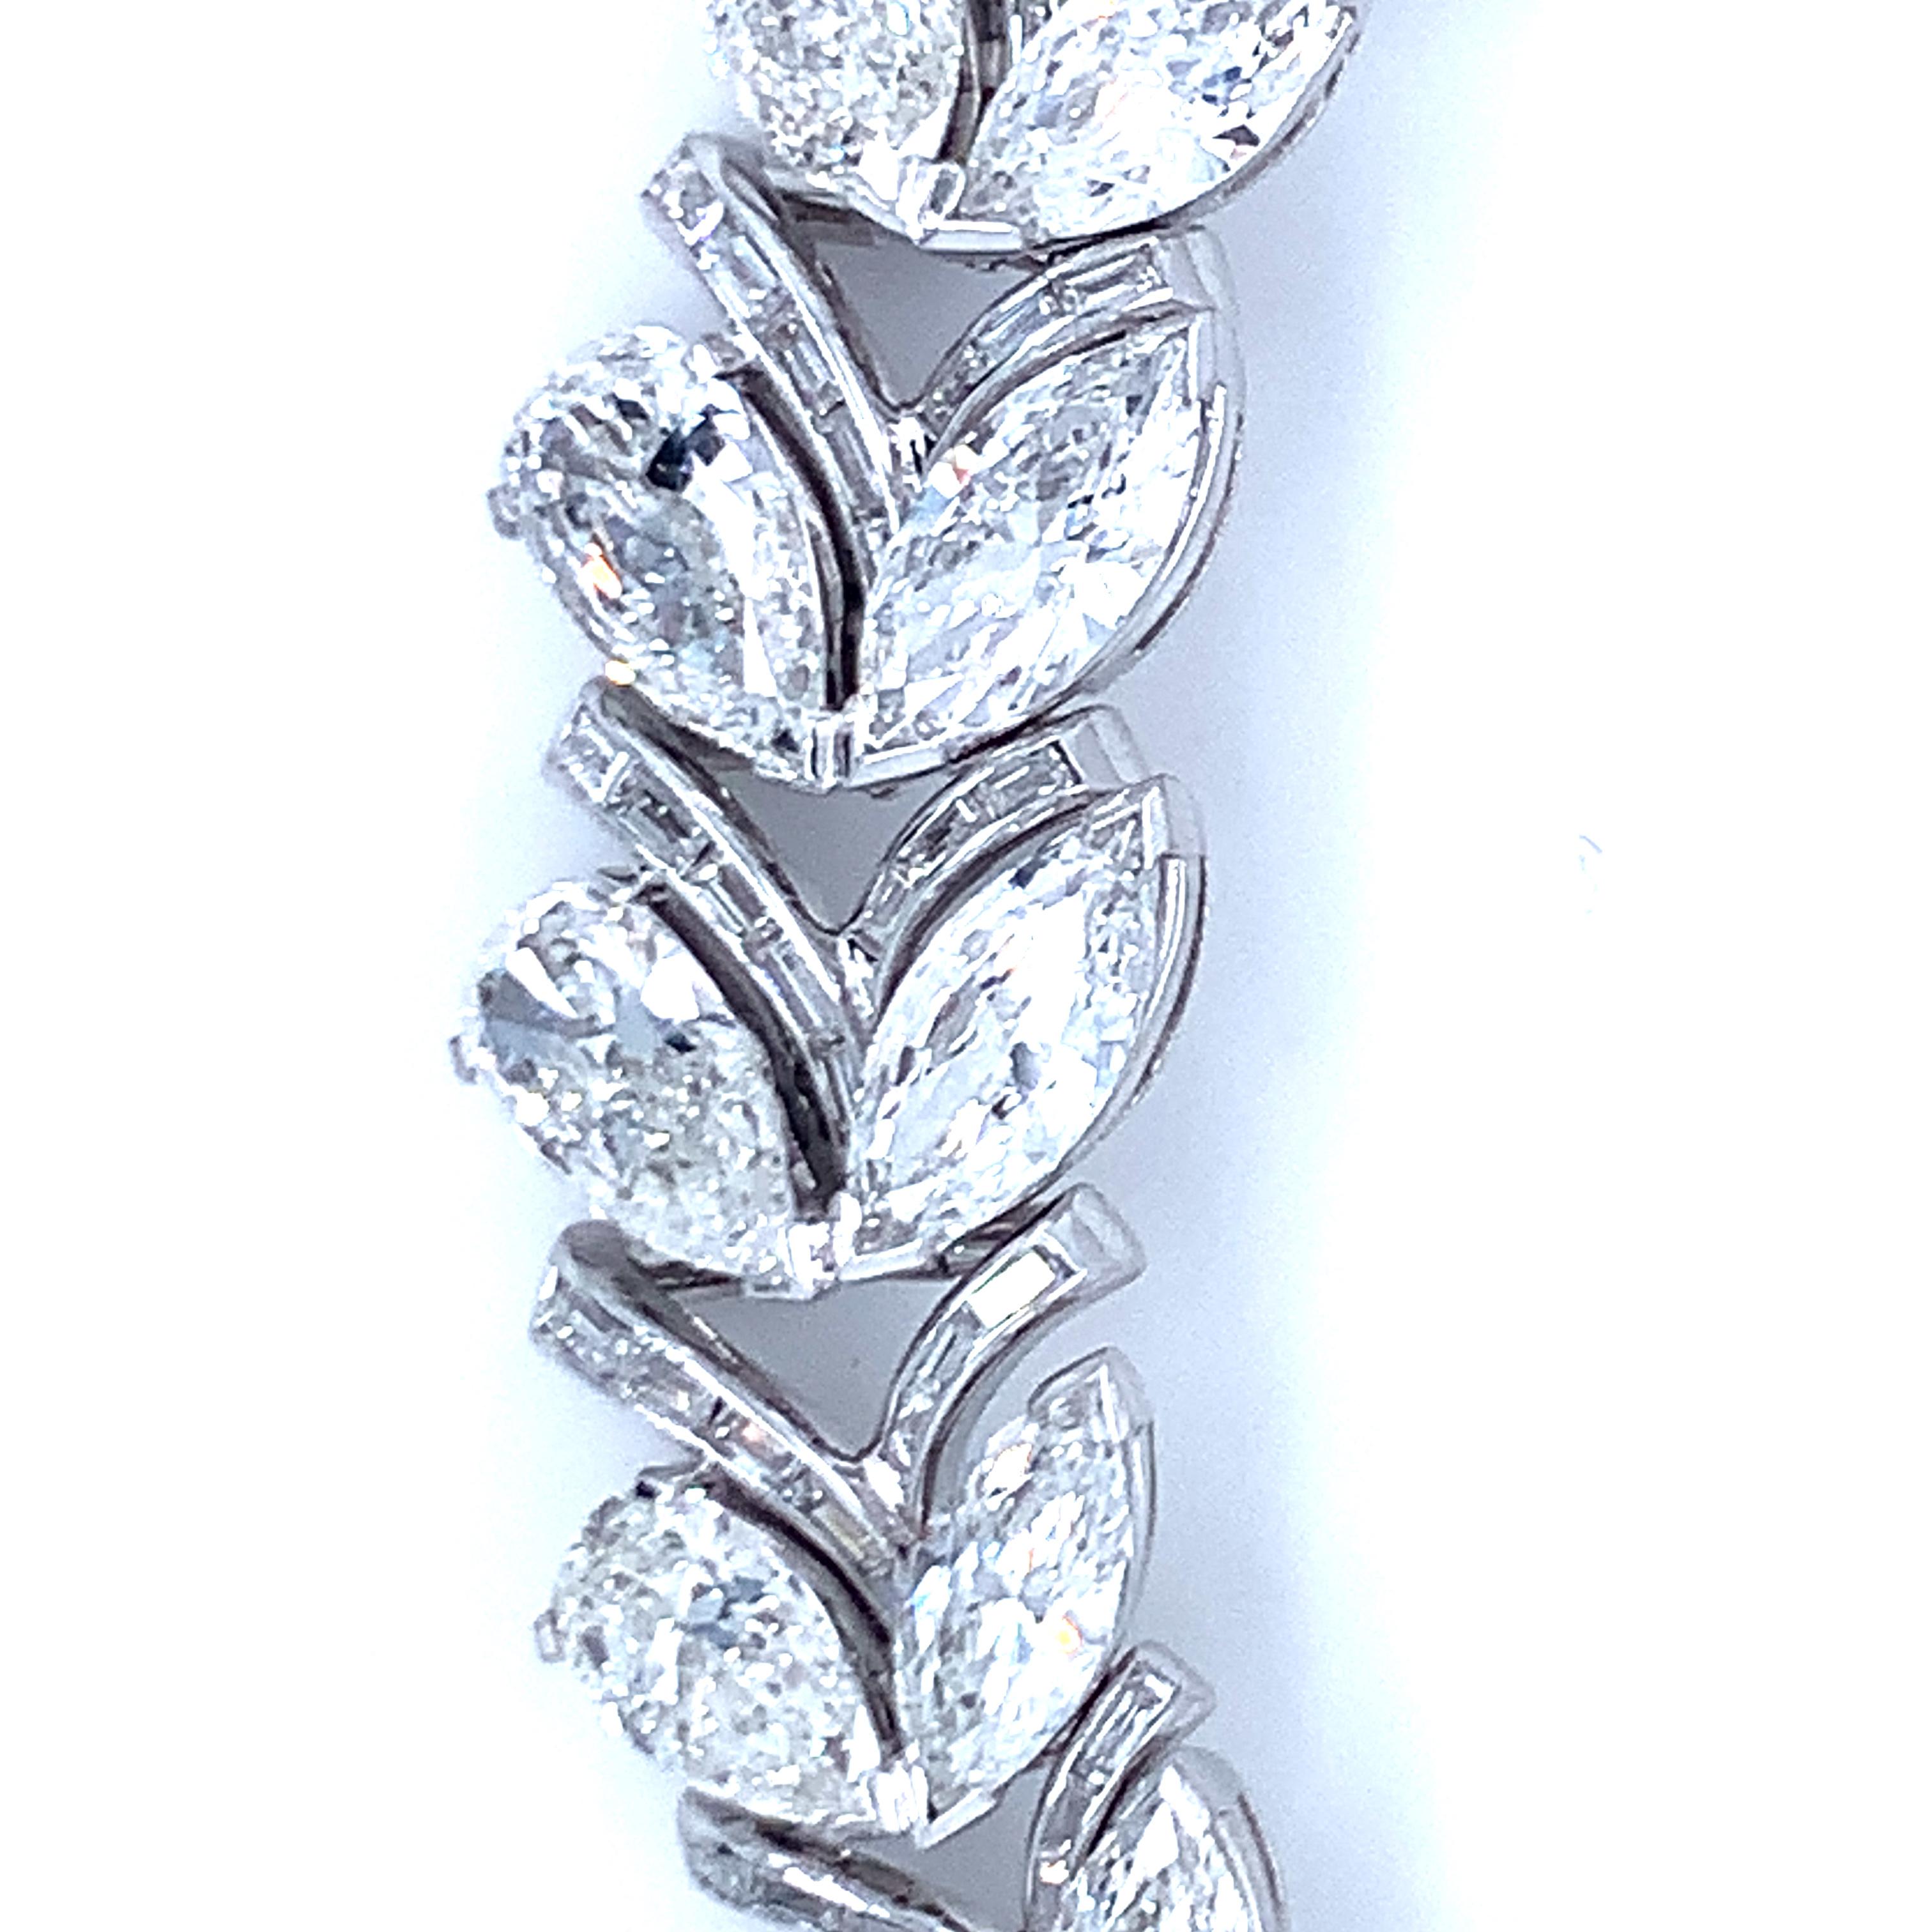 One mid-century diamond necklace set in platinum featuring 324 marquise, pear and straight baguette diamonds with an approximate total weight of 48 ct., H-I-J / VS-2, SI-1. 18 of the stones at over 1 ct. positioned at center of necklace as it tapers